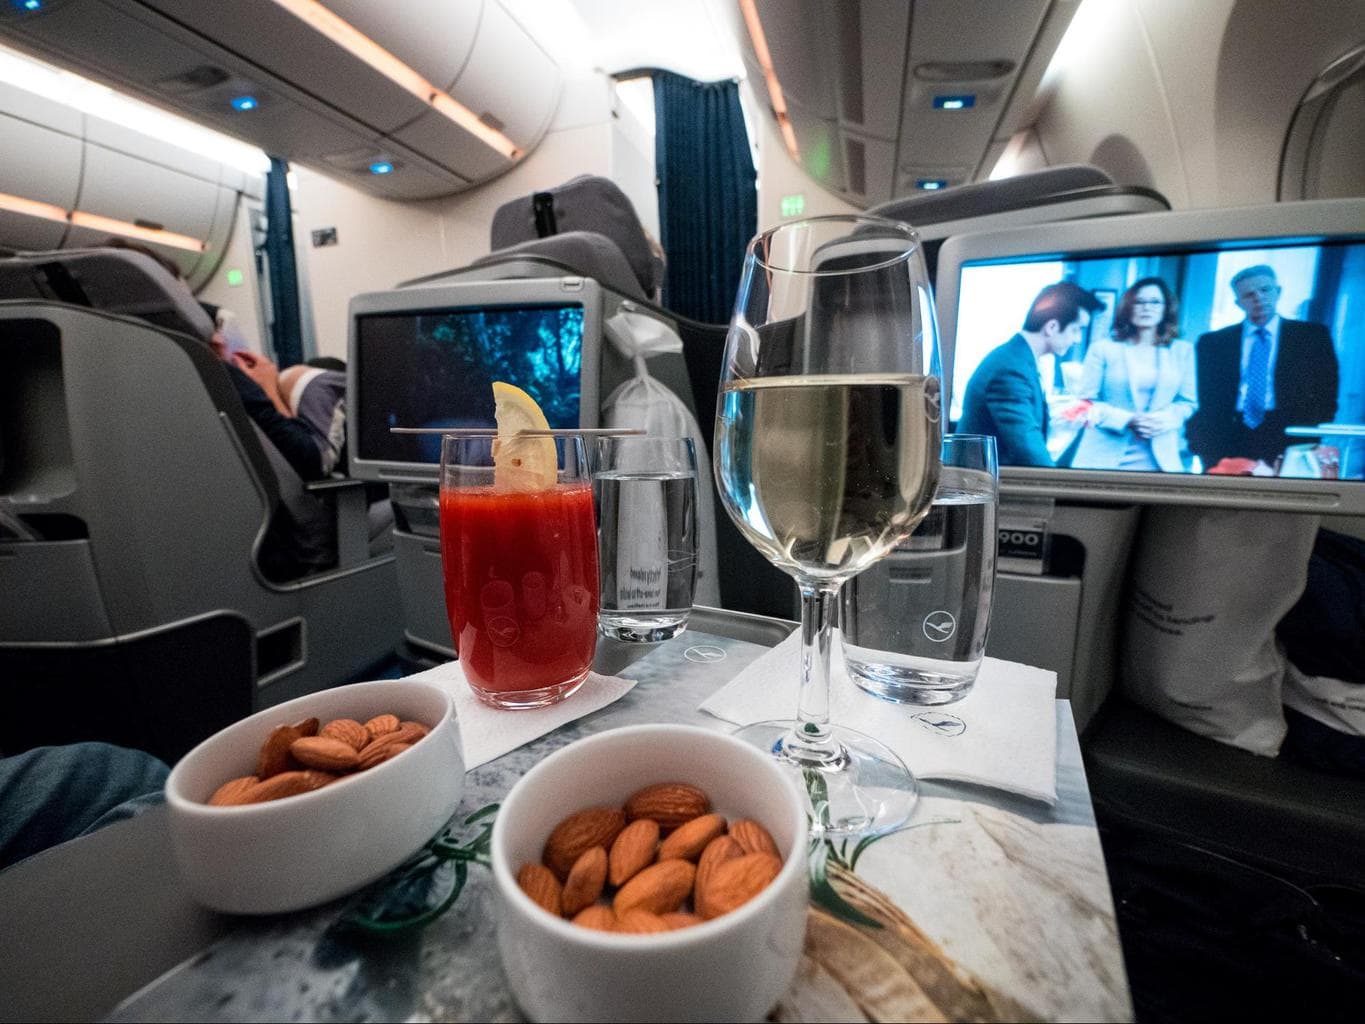 Lufthansa Business Class drinks and snacks after take-off